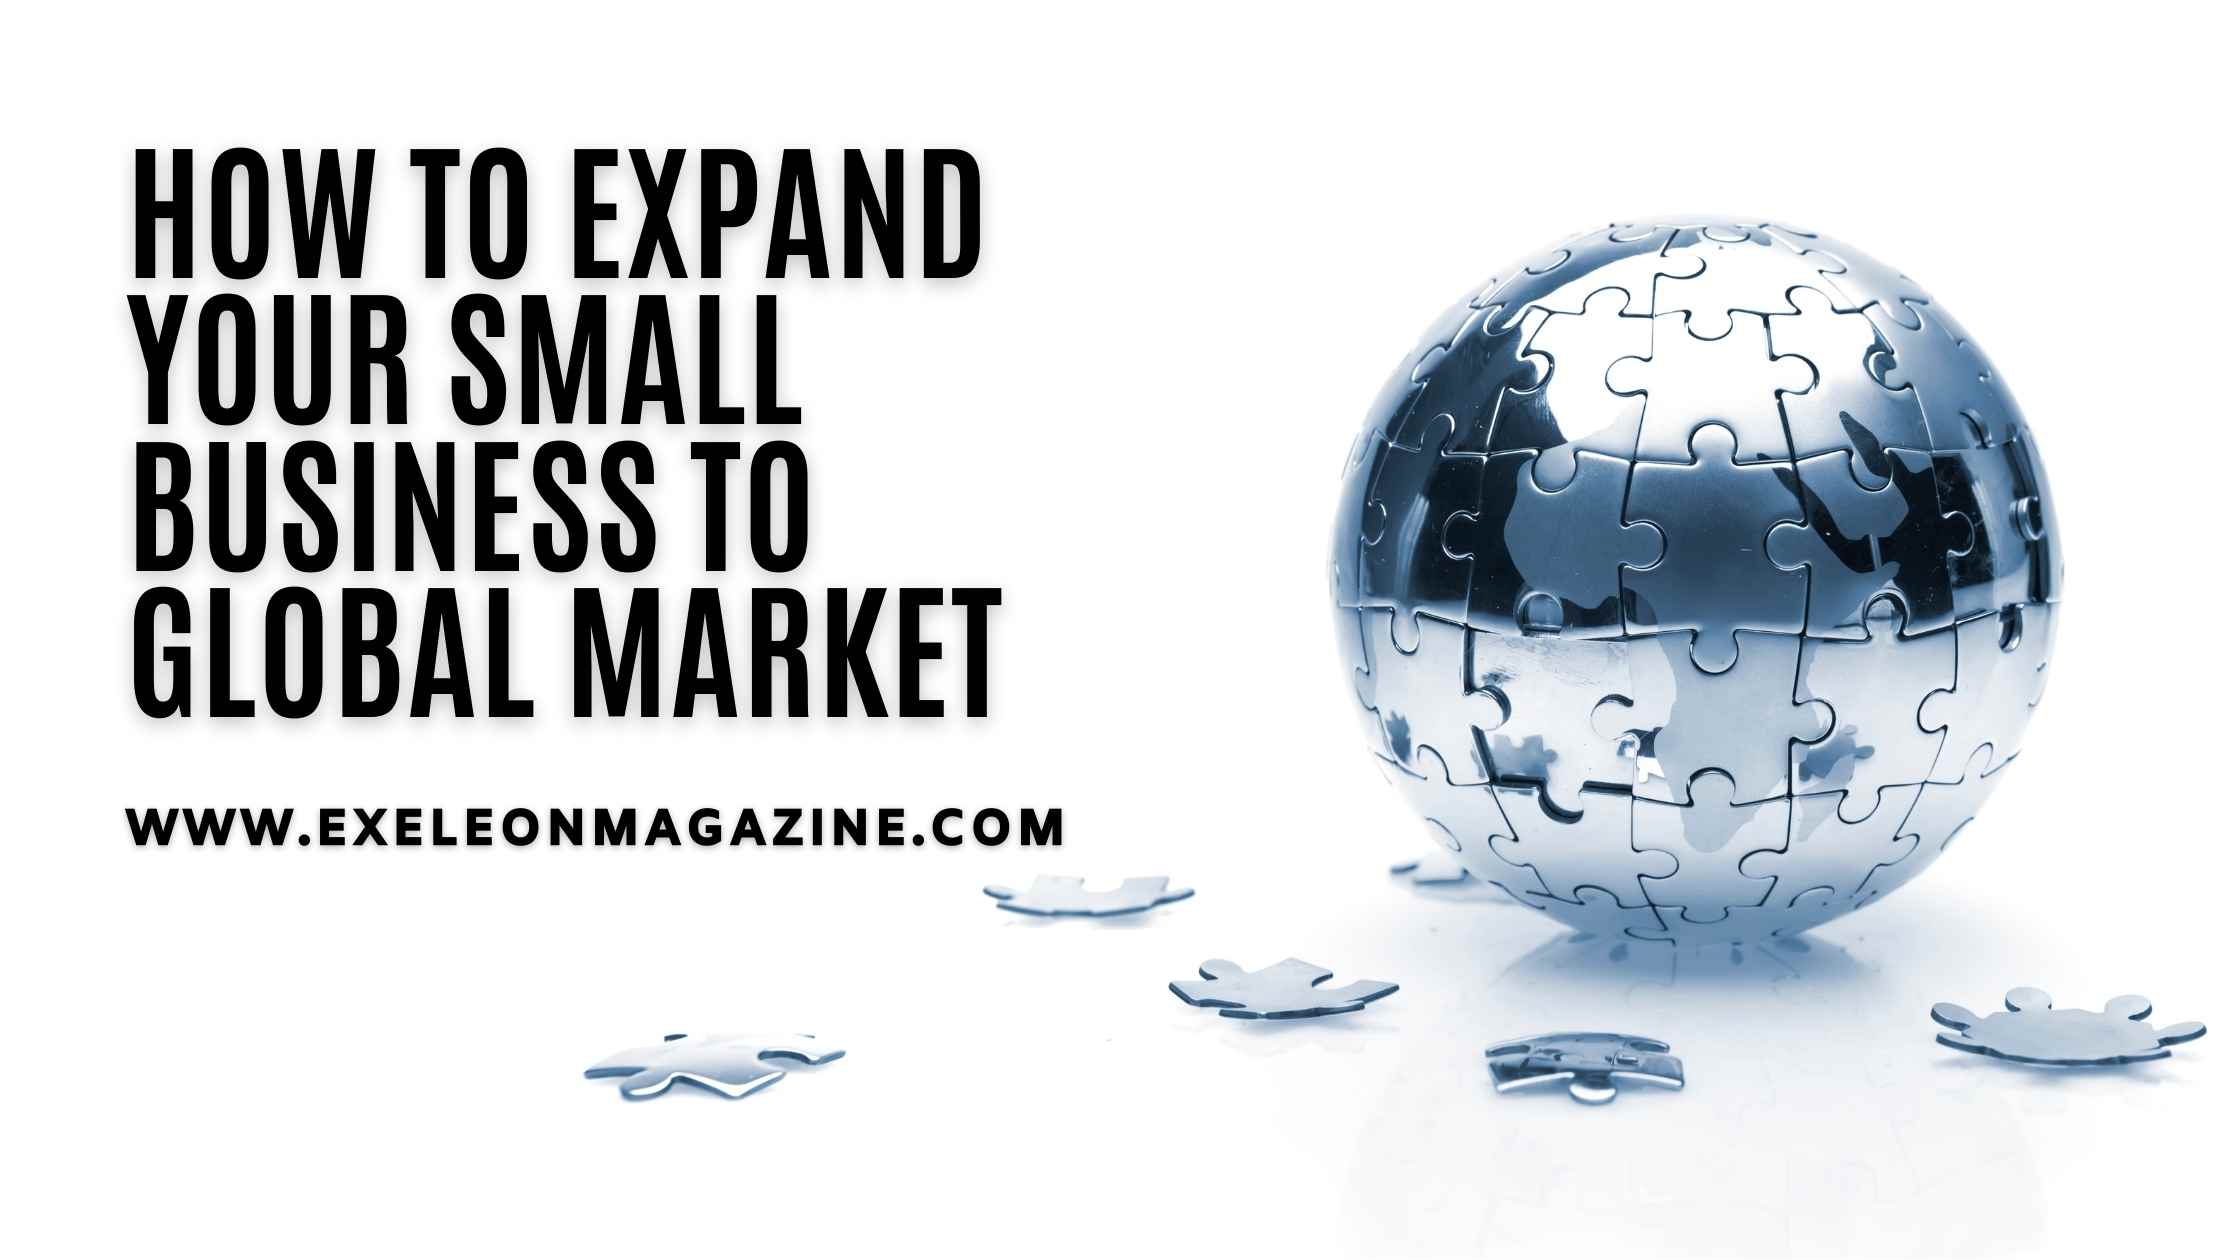 Expand Your Small Business to Global Market